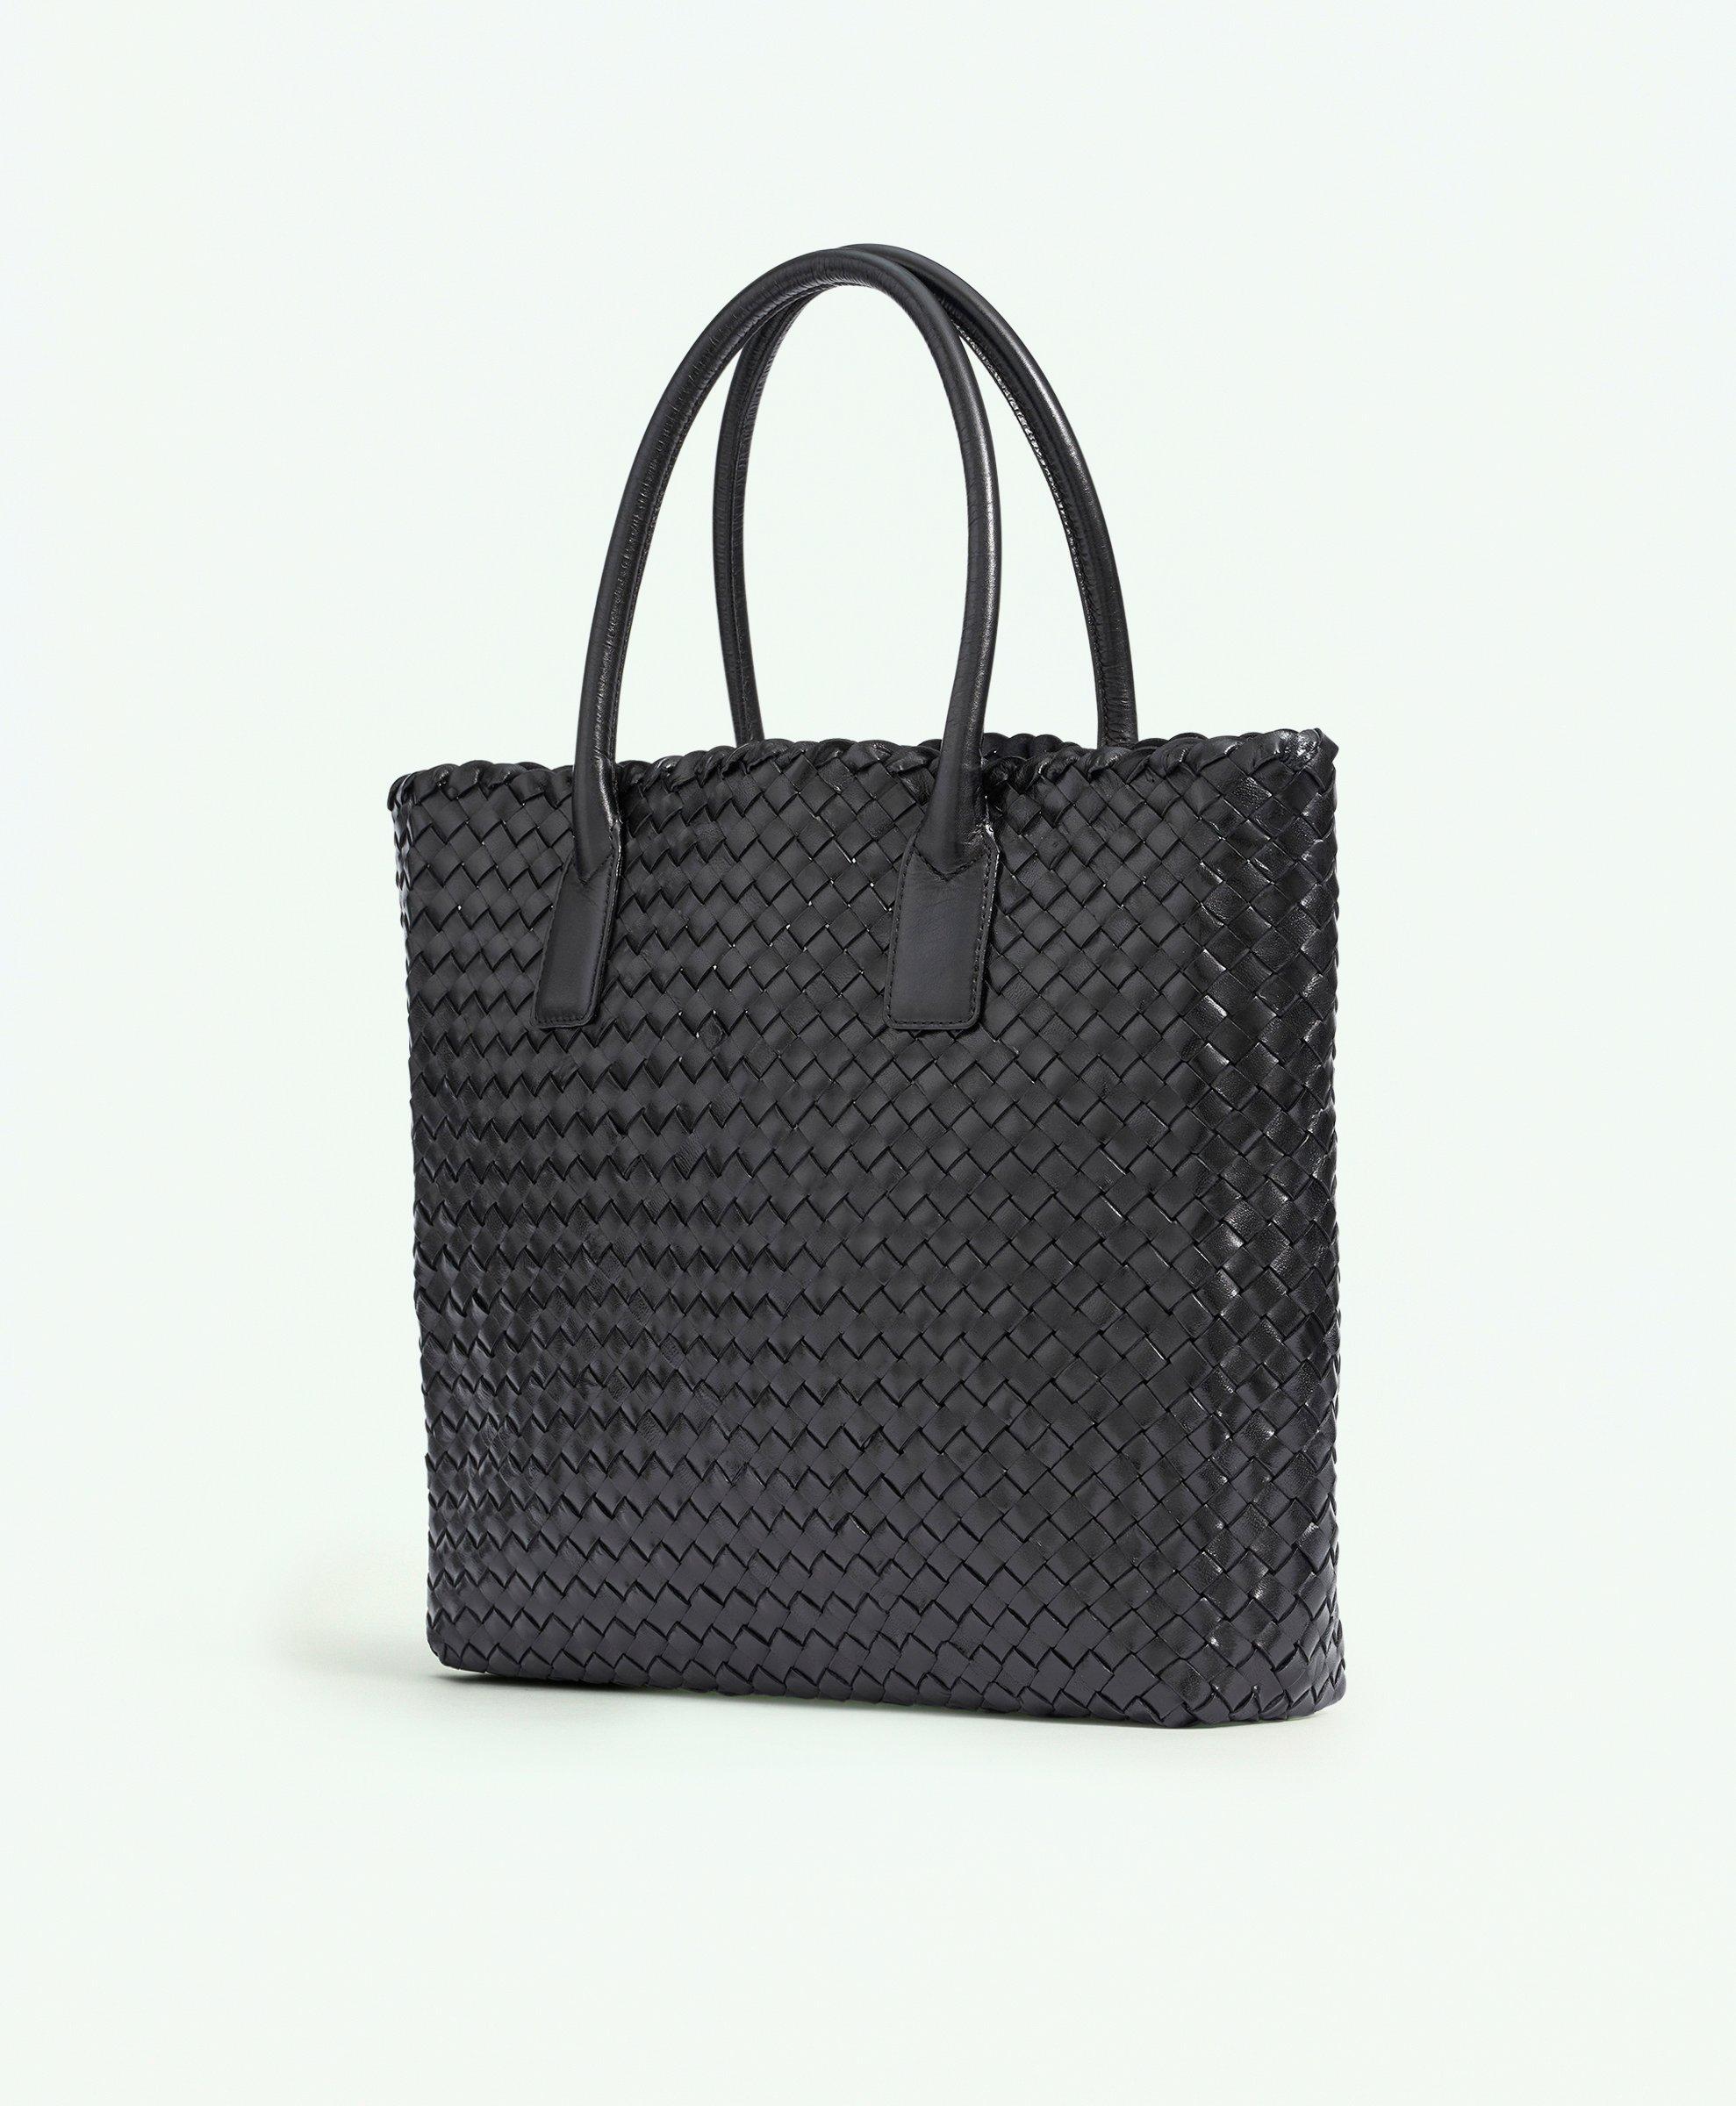 Woven Leather Tote Bag, image 1